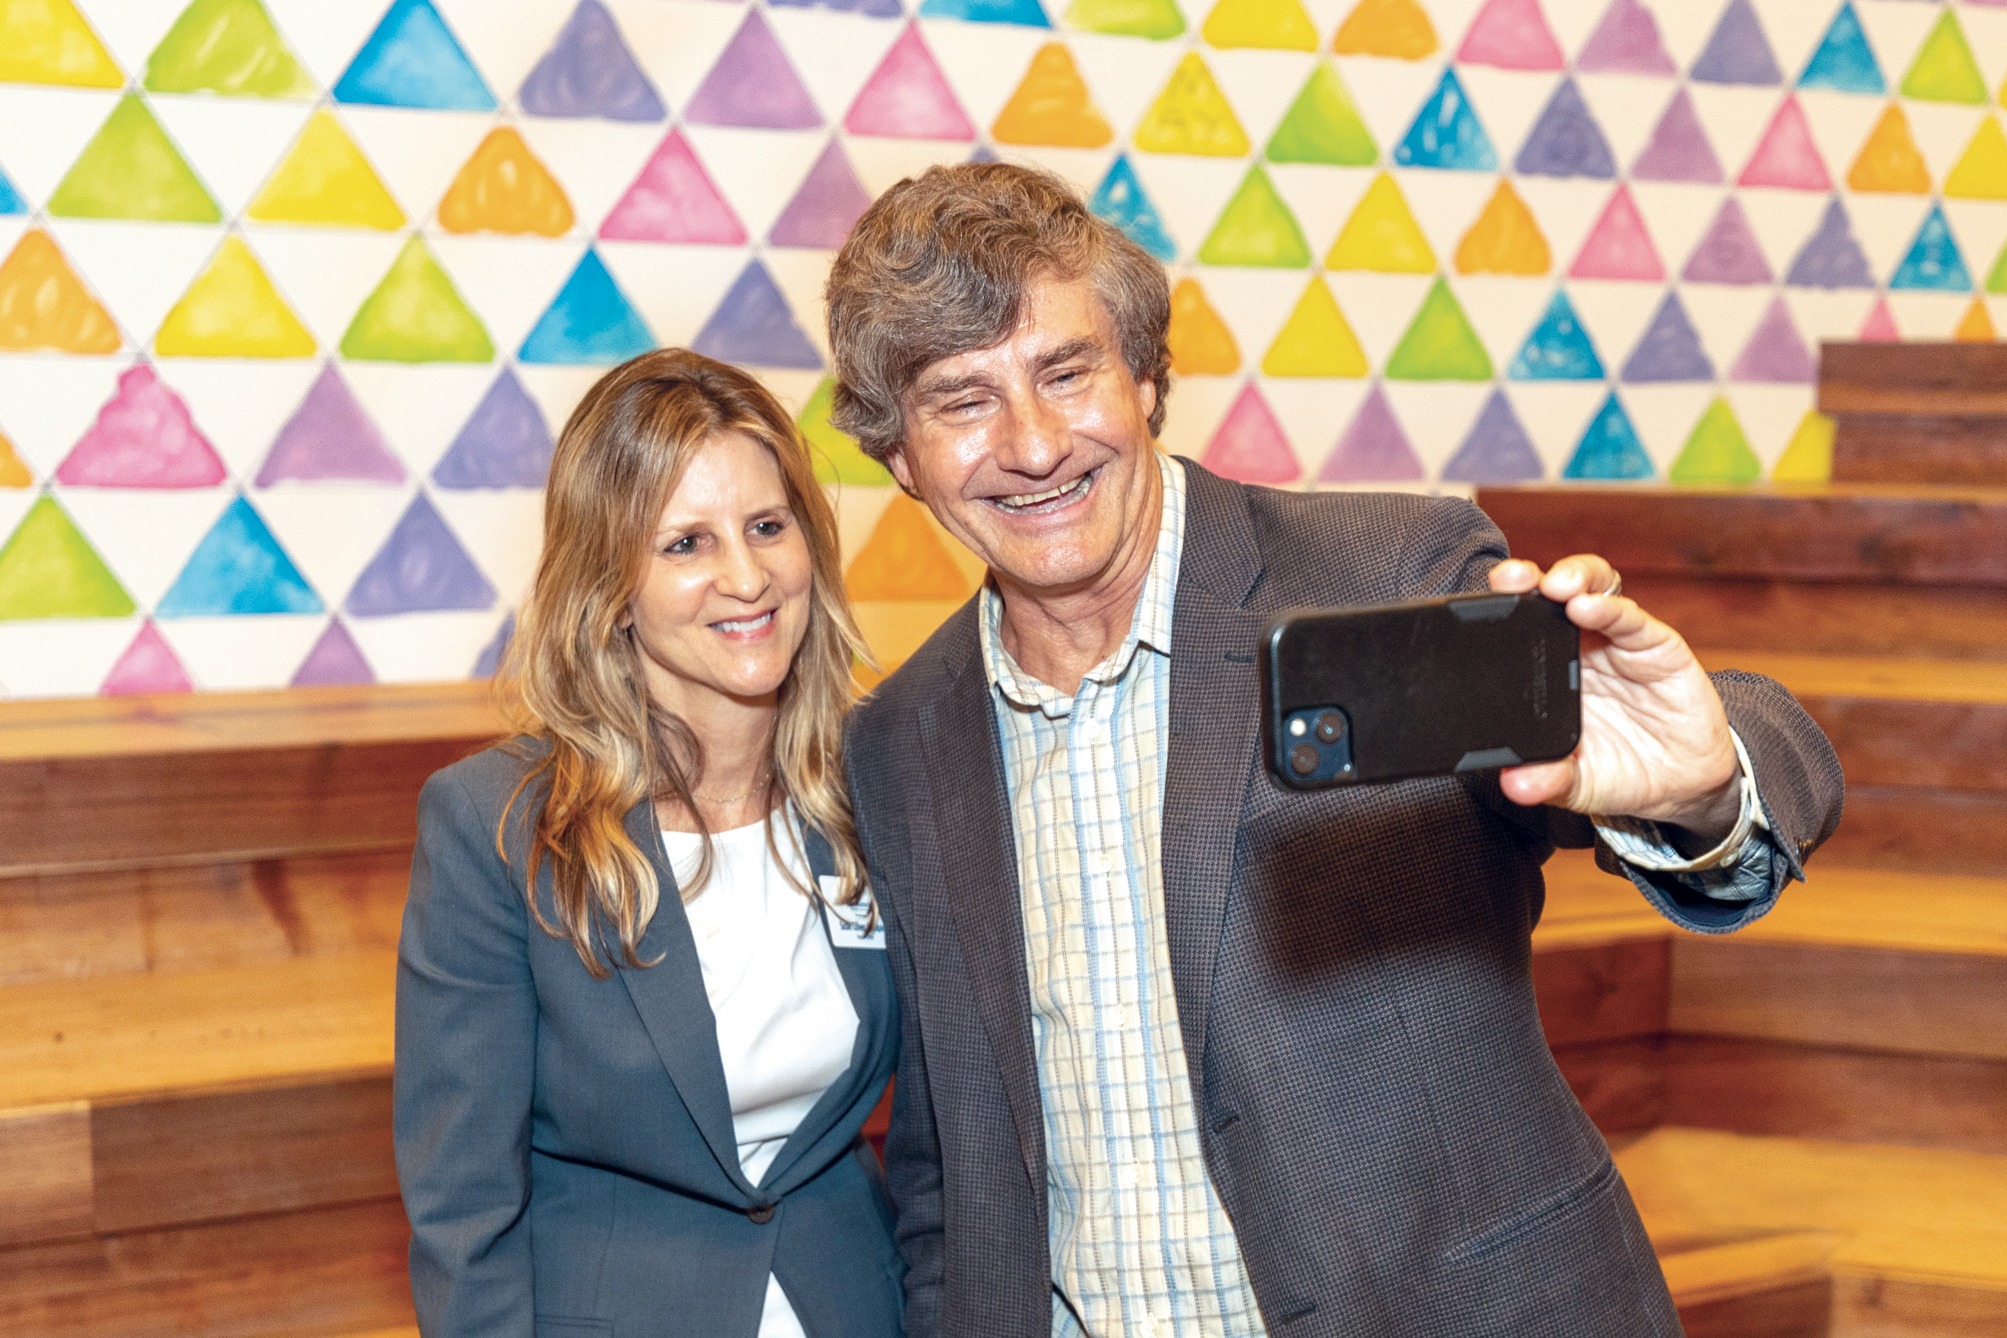 Astrophysicist and Cal professor Alex Filippenko snaps a photo with Executive Director Susie Cohen Crumpler at a recent California Live! event.